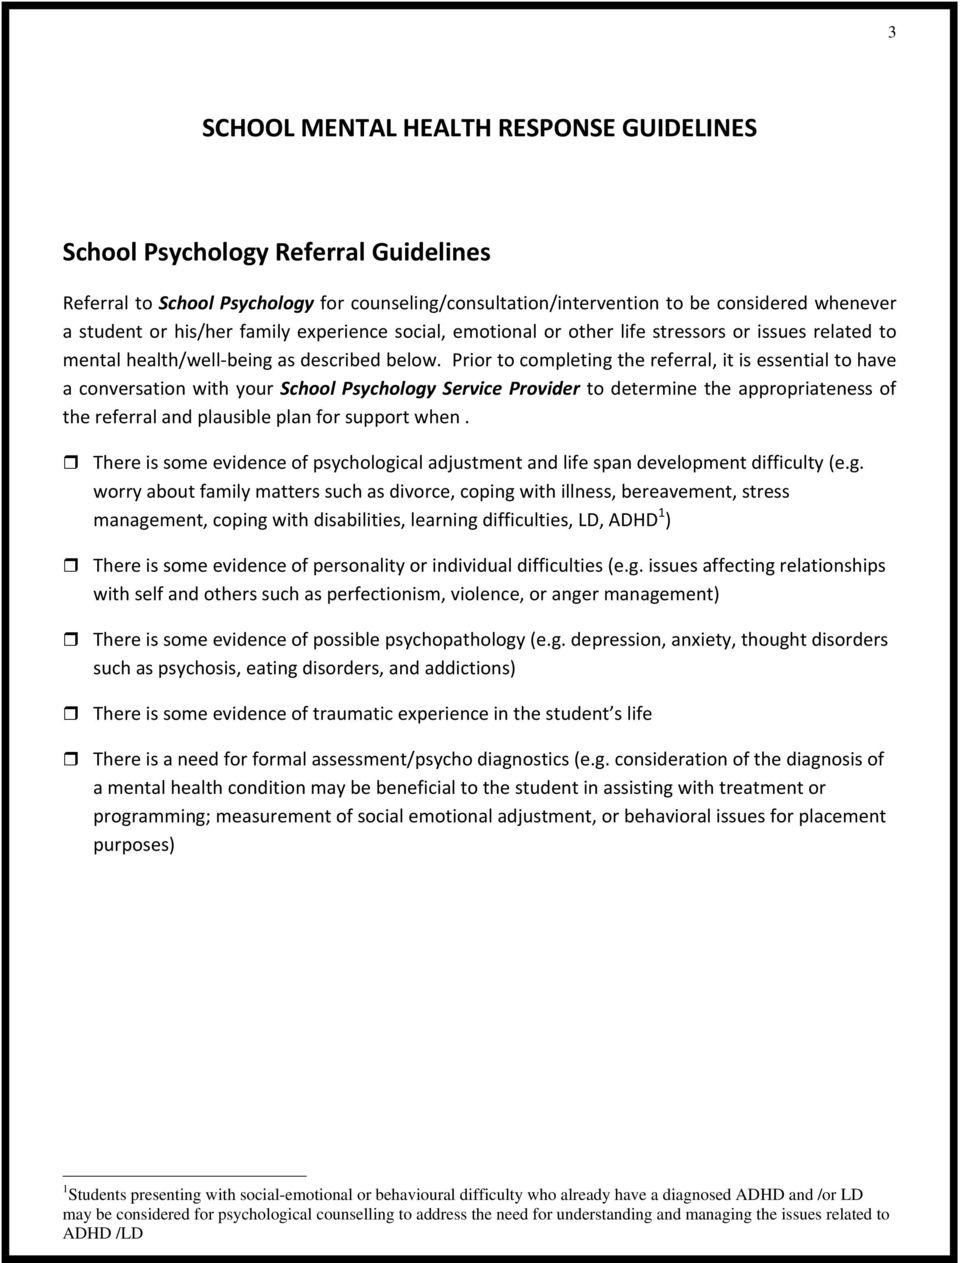 Prior to completing the referral, it is essential to have a conversation with your School Psychology Service Provider to determine the appropriateness of the referral and plausible plan for support